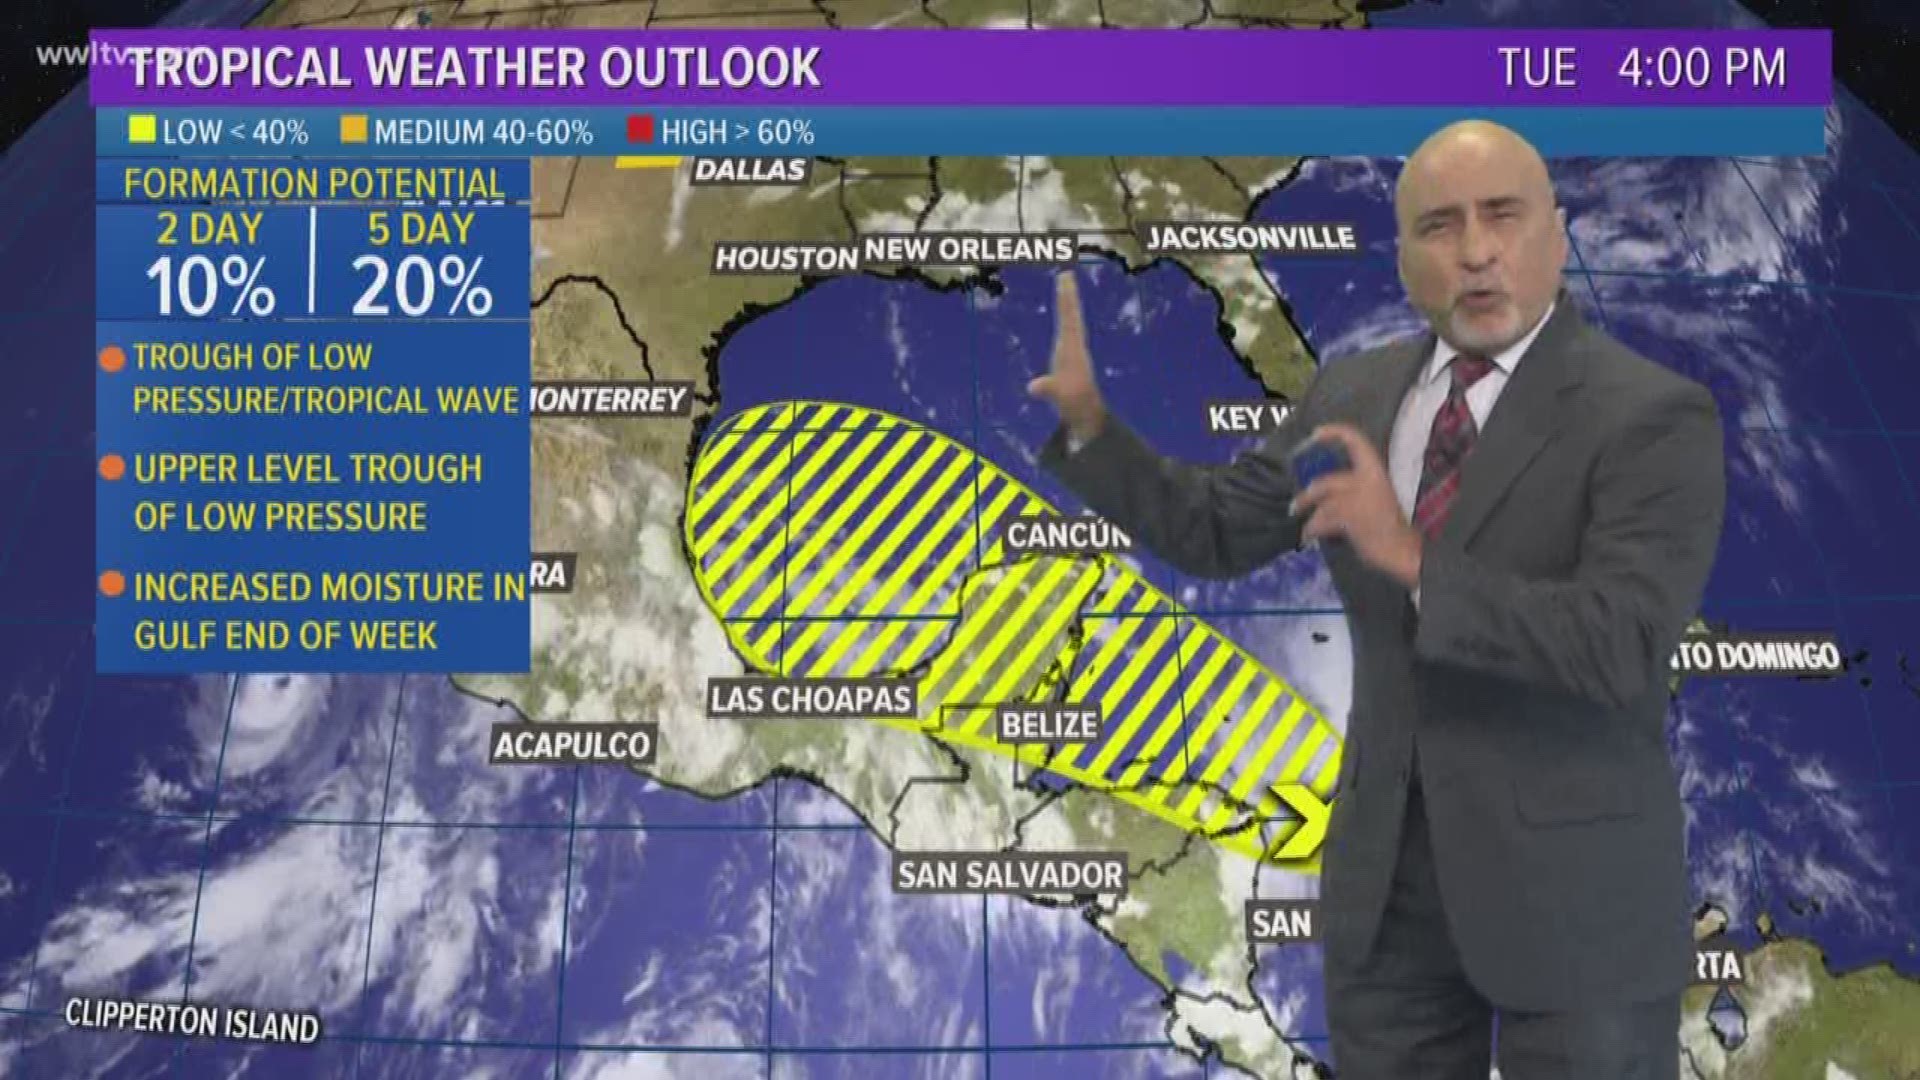 Chief Meteorologist Carl Arredondo and the Tuesday Evening Tropical Update